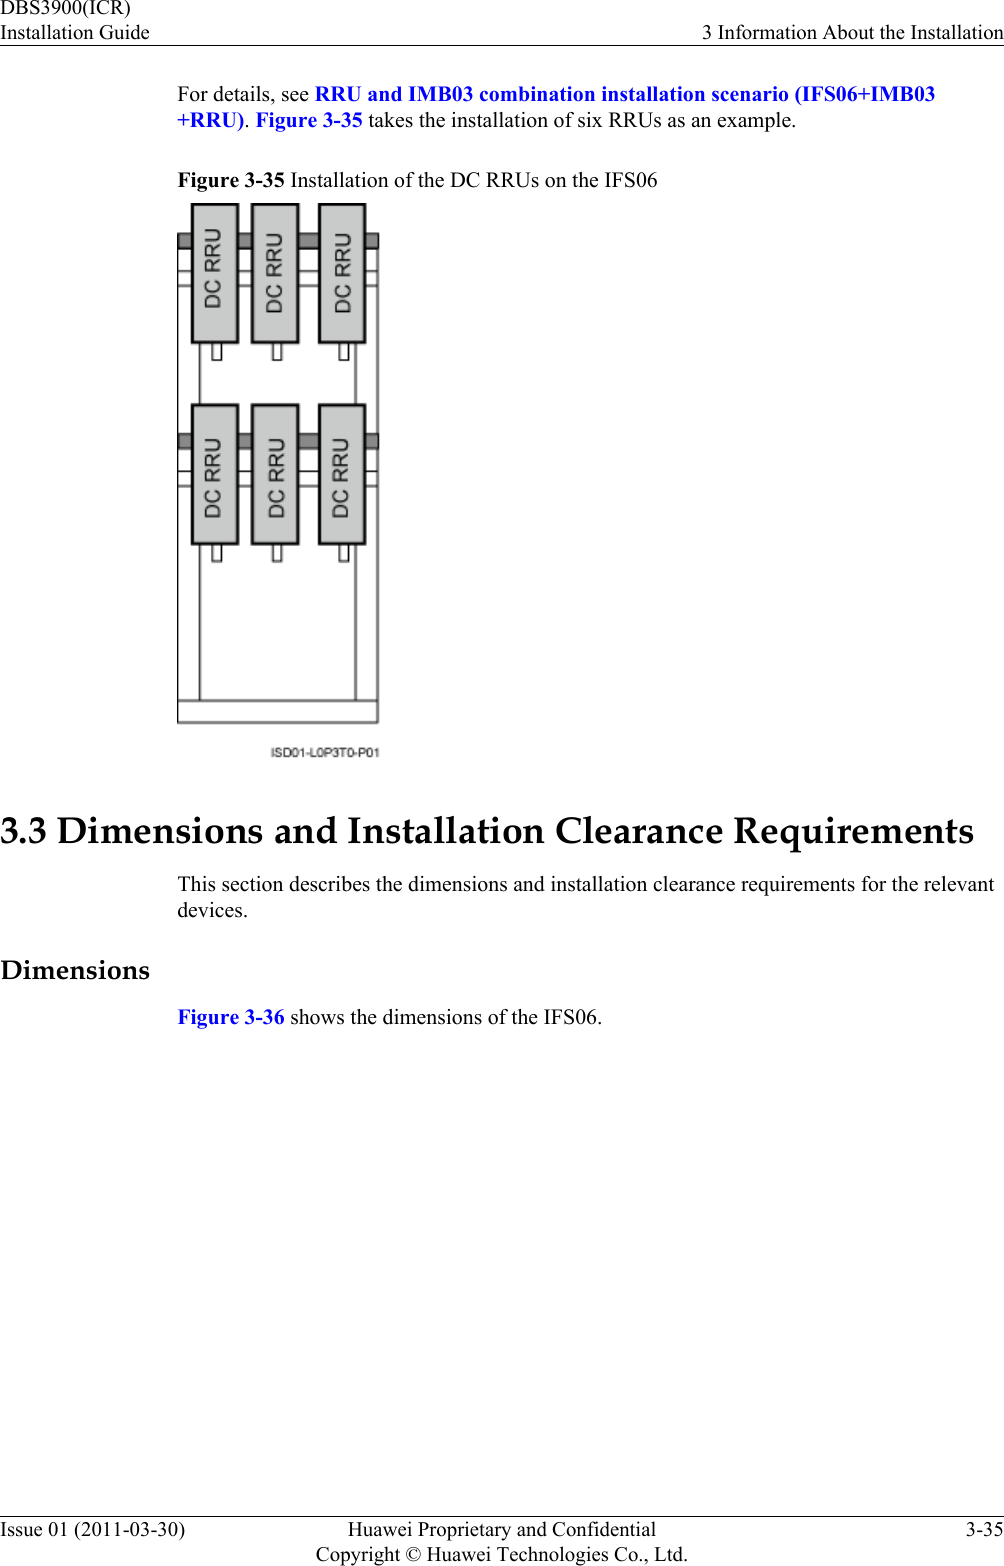 For details, see RRU and IMB03 combination installation scenario (IFS06+IMB03+RRU). Figure 3-35 takes the installation of six RRUs as an example.Figure 3-35 Installation of the DC RRUs on the IFS063.3 Dimensions and Installation Clearance RequirementsThis section describes the dimensions and installation clearance requirements for the relevantdevices.DimensionsFigure 3-36 shows the dimensions of the IFS06.DBS3900(ICR)Installation Guide 3 Information About the InstallationIssue 01 (2011-03-30) Huawei Proprietary and ConfidentialCopyright © Huawei Technologies Co., Ltd.3-35